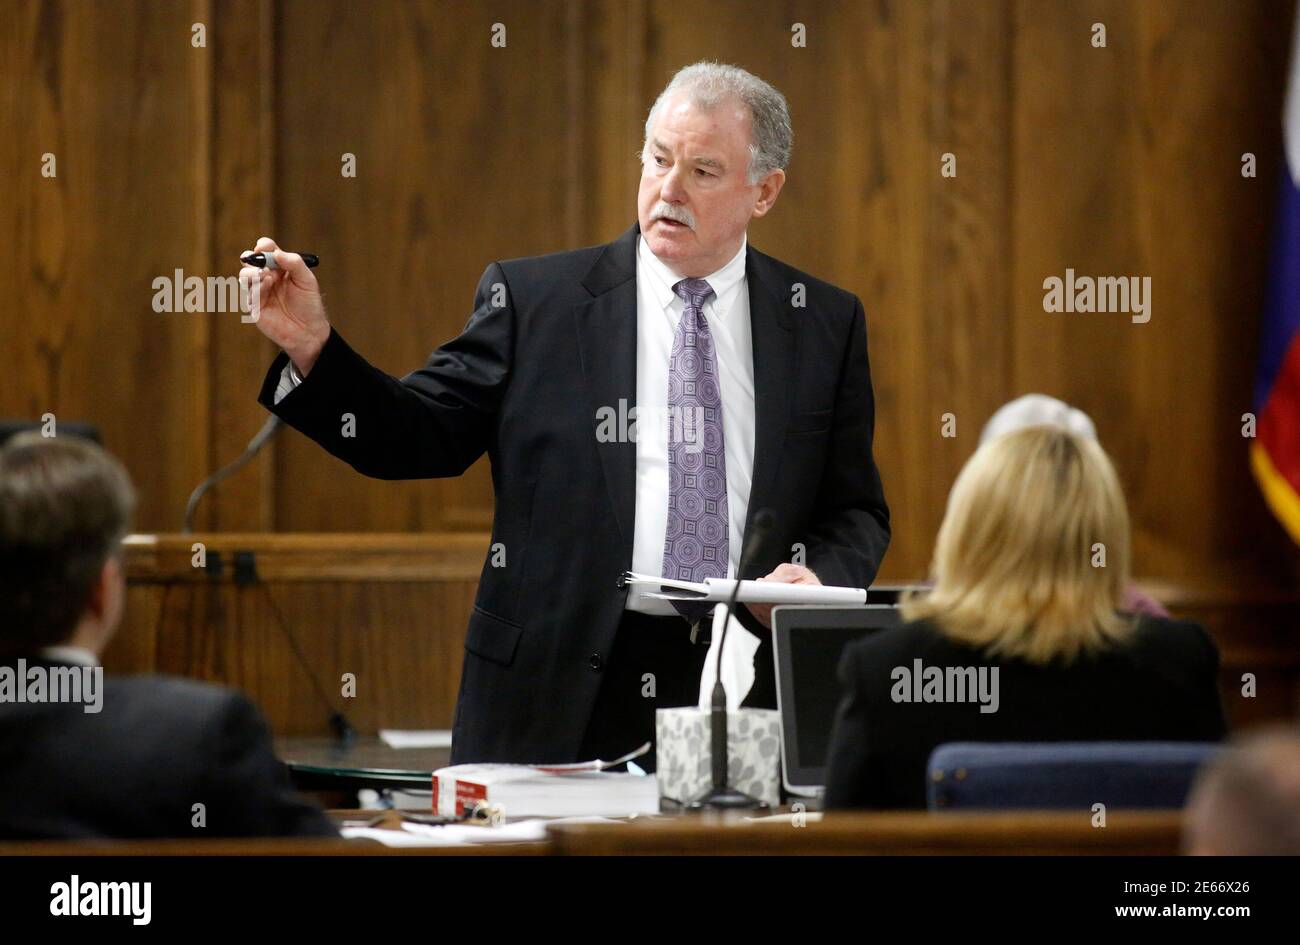 Court appointed defense attorney Tim Moore delivers his opening statement during the capital murder trial of former Marine Eddie Ray Routh at the Erath County Donald R. Jones Justice Center in Stephenville, Texas February 11, 2015. Routh, 27, is charged with murdering Navy SEAL Chris Kyle, who was credited with the most kills of any U.S. sniper, and Kyle's friend Chad Littlefield in 2013.   REUTERS/Tom Fox/Pool (UNITED STATES - Tags: CRIME LAW MILITARY) Stock Photo